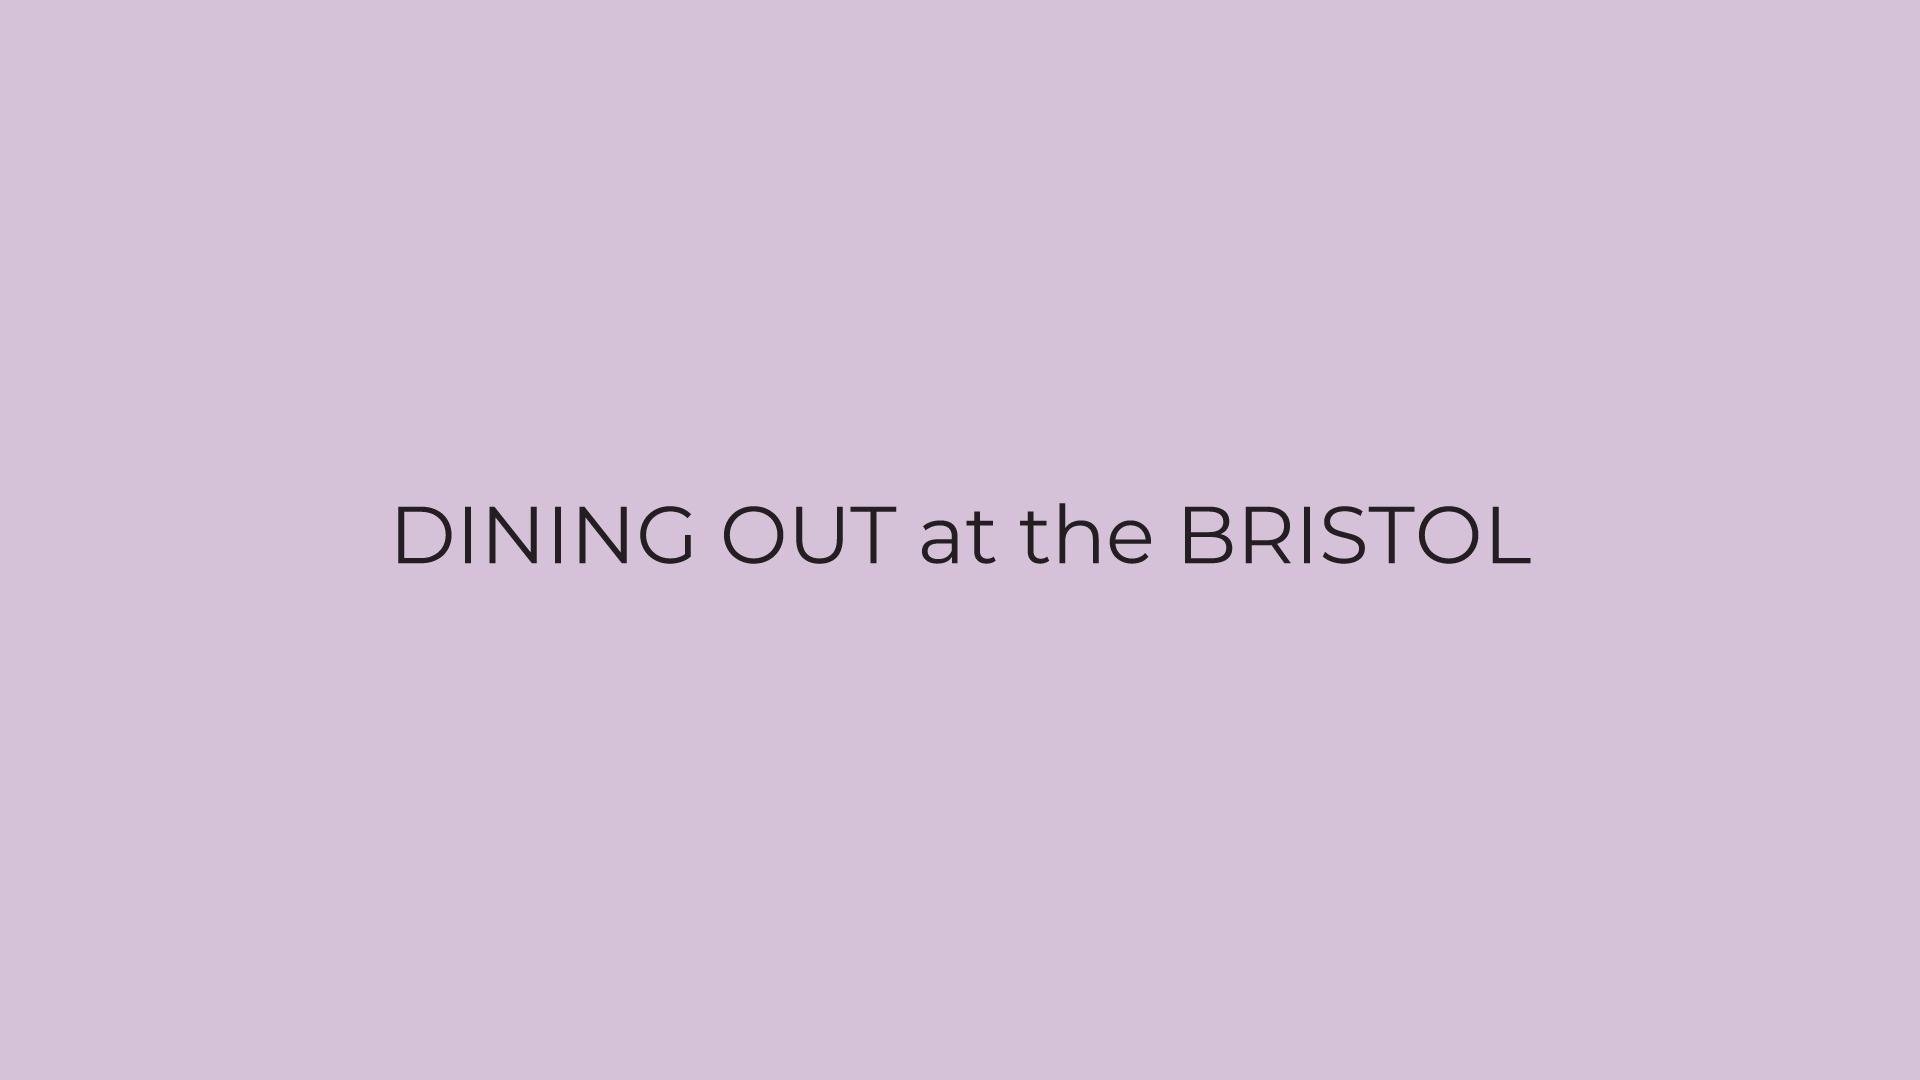 the bristol wellesley dining out type on lavender